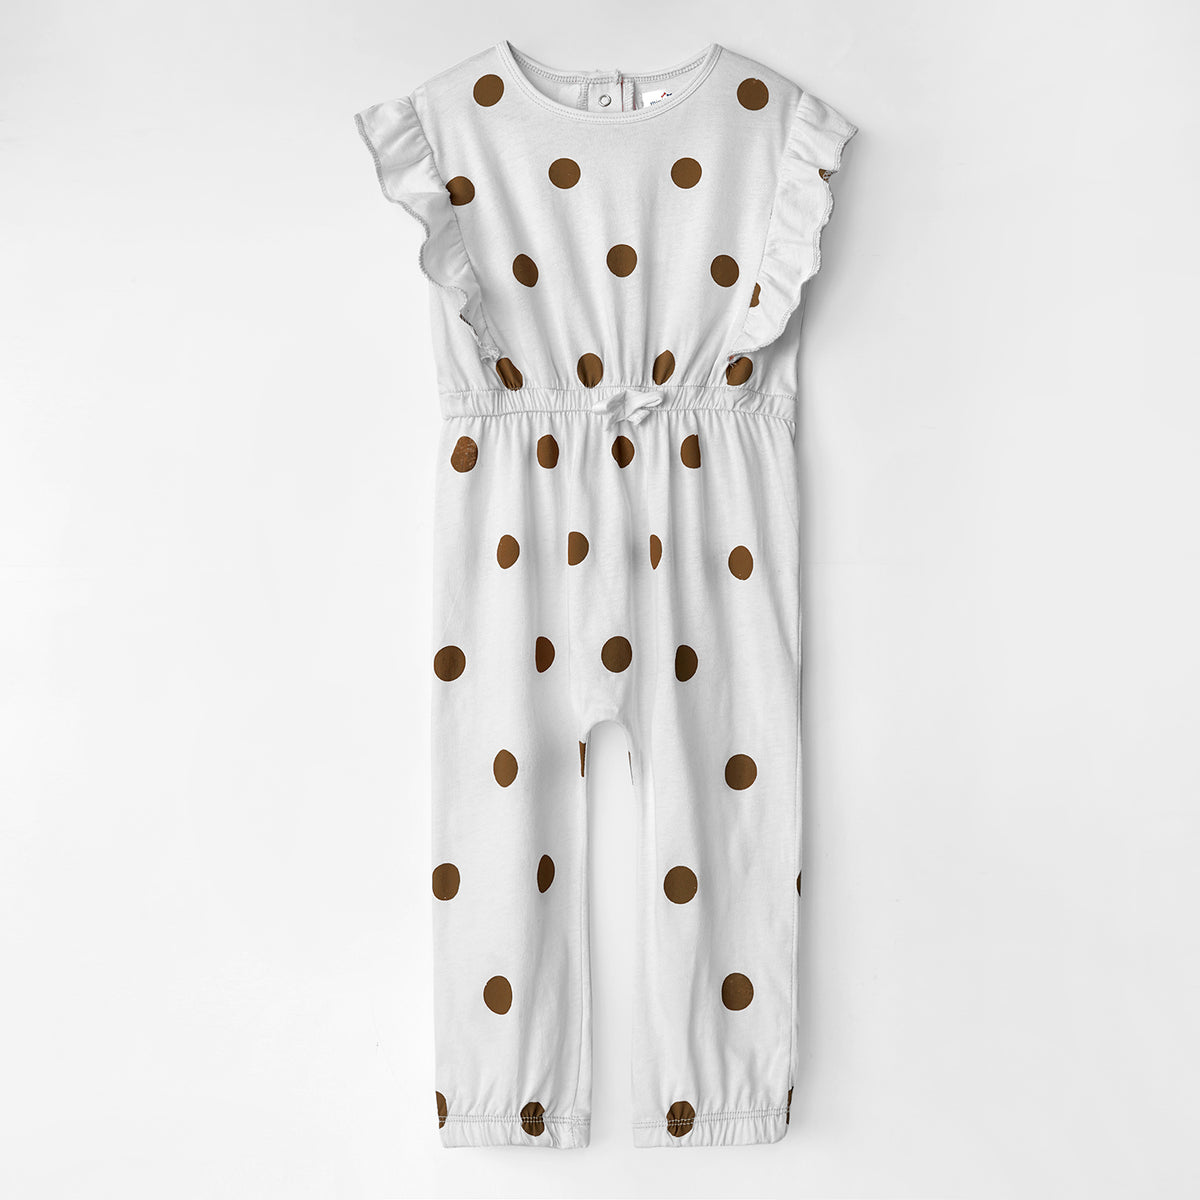 Girls Fashion All Over Polka Dots Printed Soft Cotton Frill Jumpsuit 246